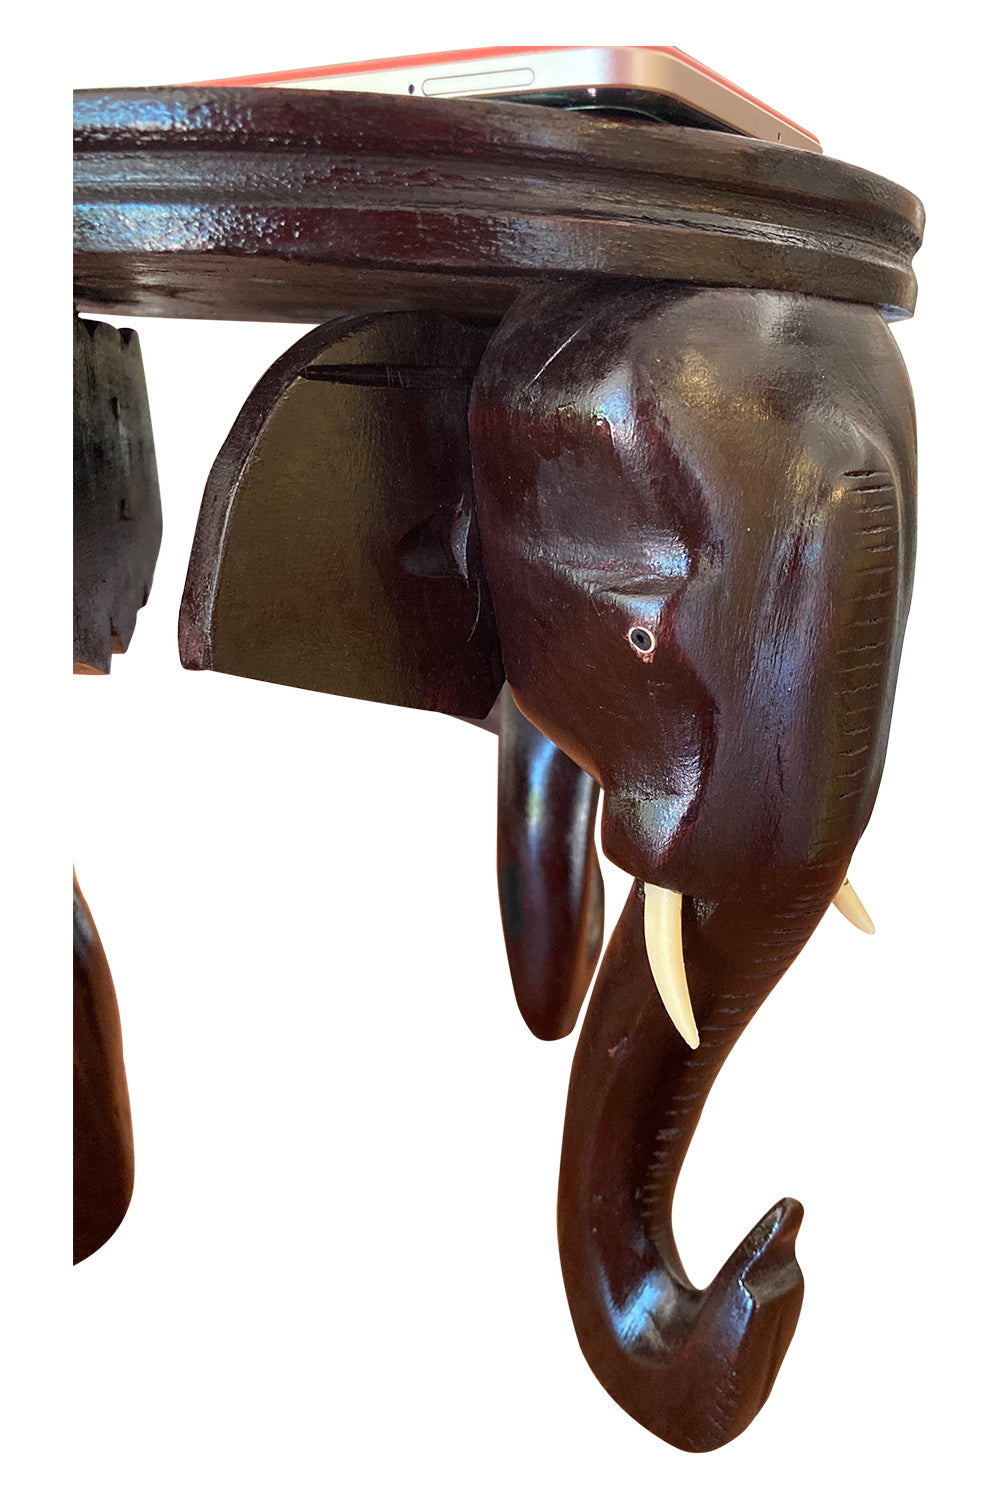 Southloom Handmade Elephant Head Flower Pot Stand Handicraft 9 inches (Carved from Mahogany Wood)